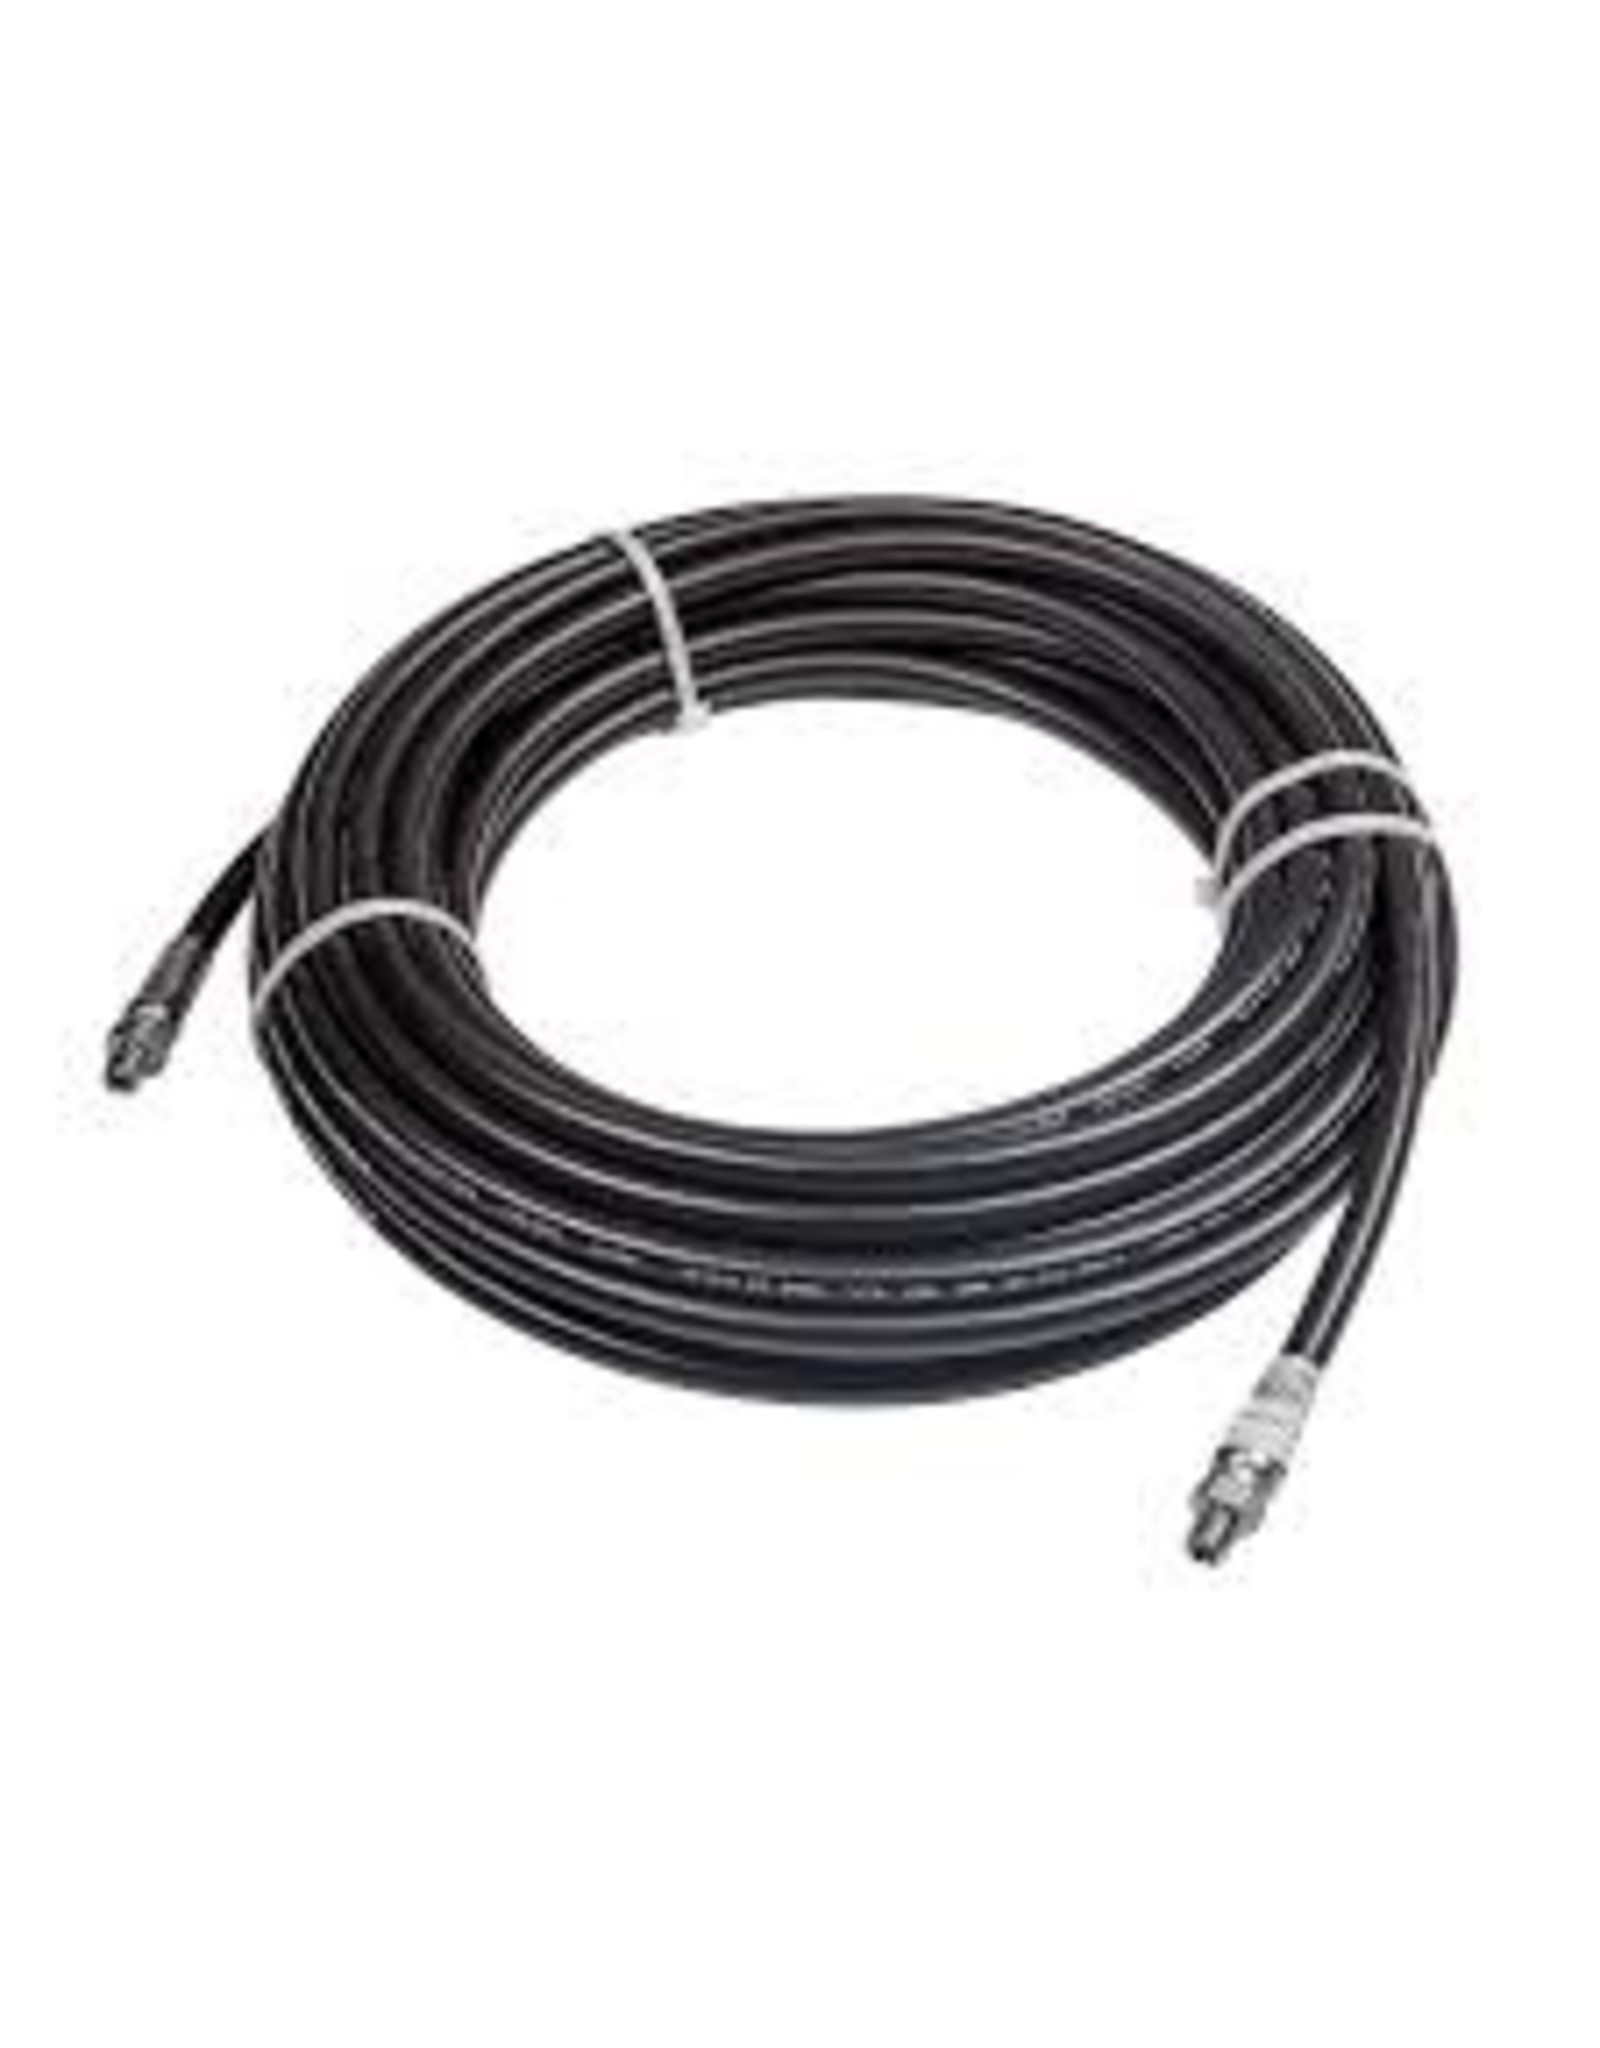 BE 85.236.050 Sewer Jetter Hose 3/16 x 50 Ft